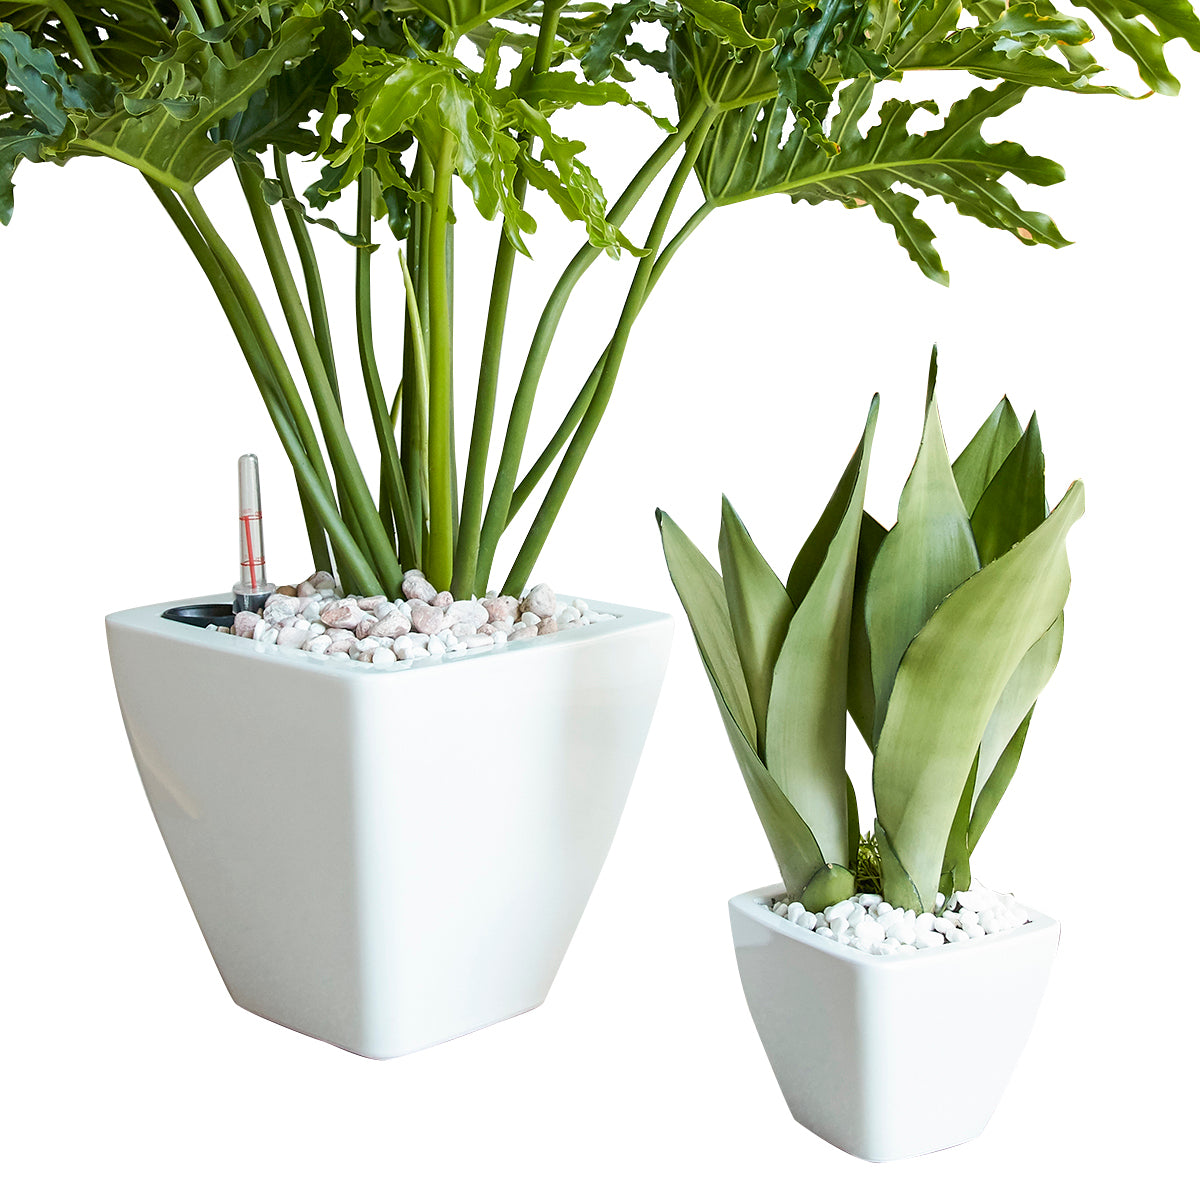 2-Pack-Smart-Self-watering-Planter-Pot-for-Indoor-and-Outdoor-White-Square-Cone-Pots-&-Planters